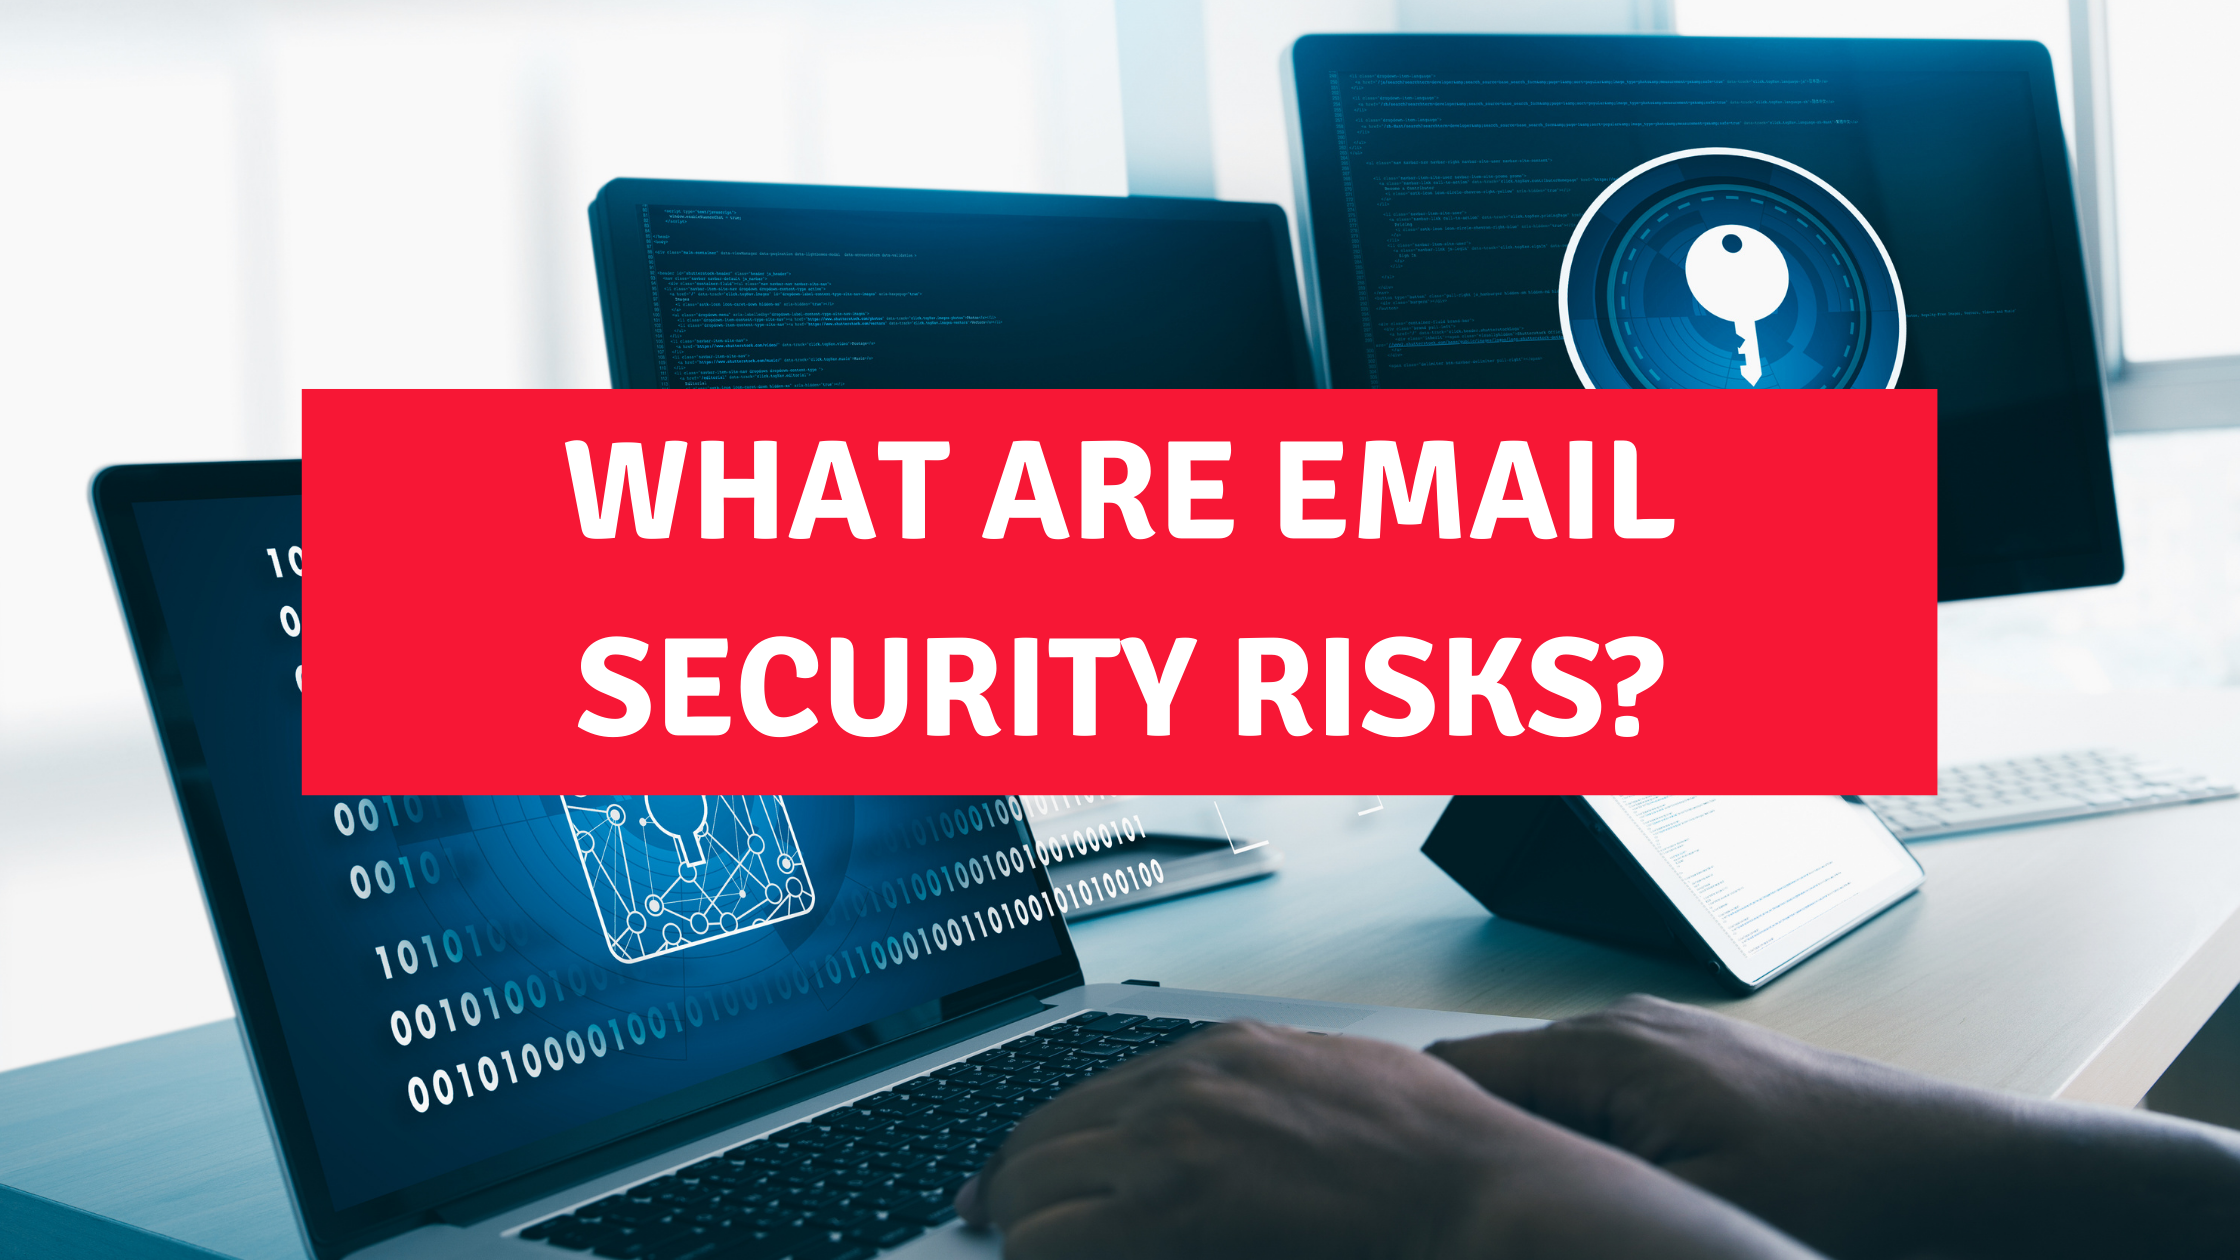 Find our more about email security here